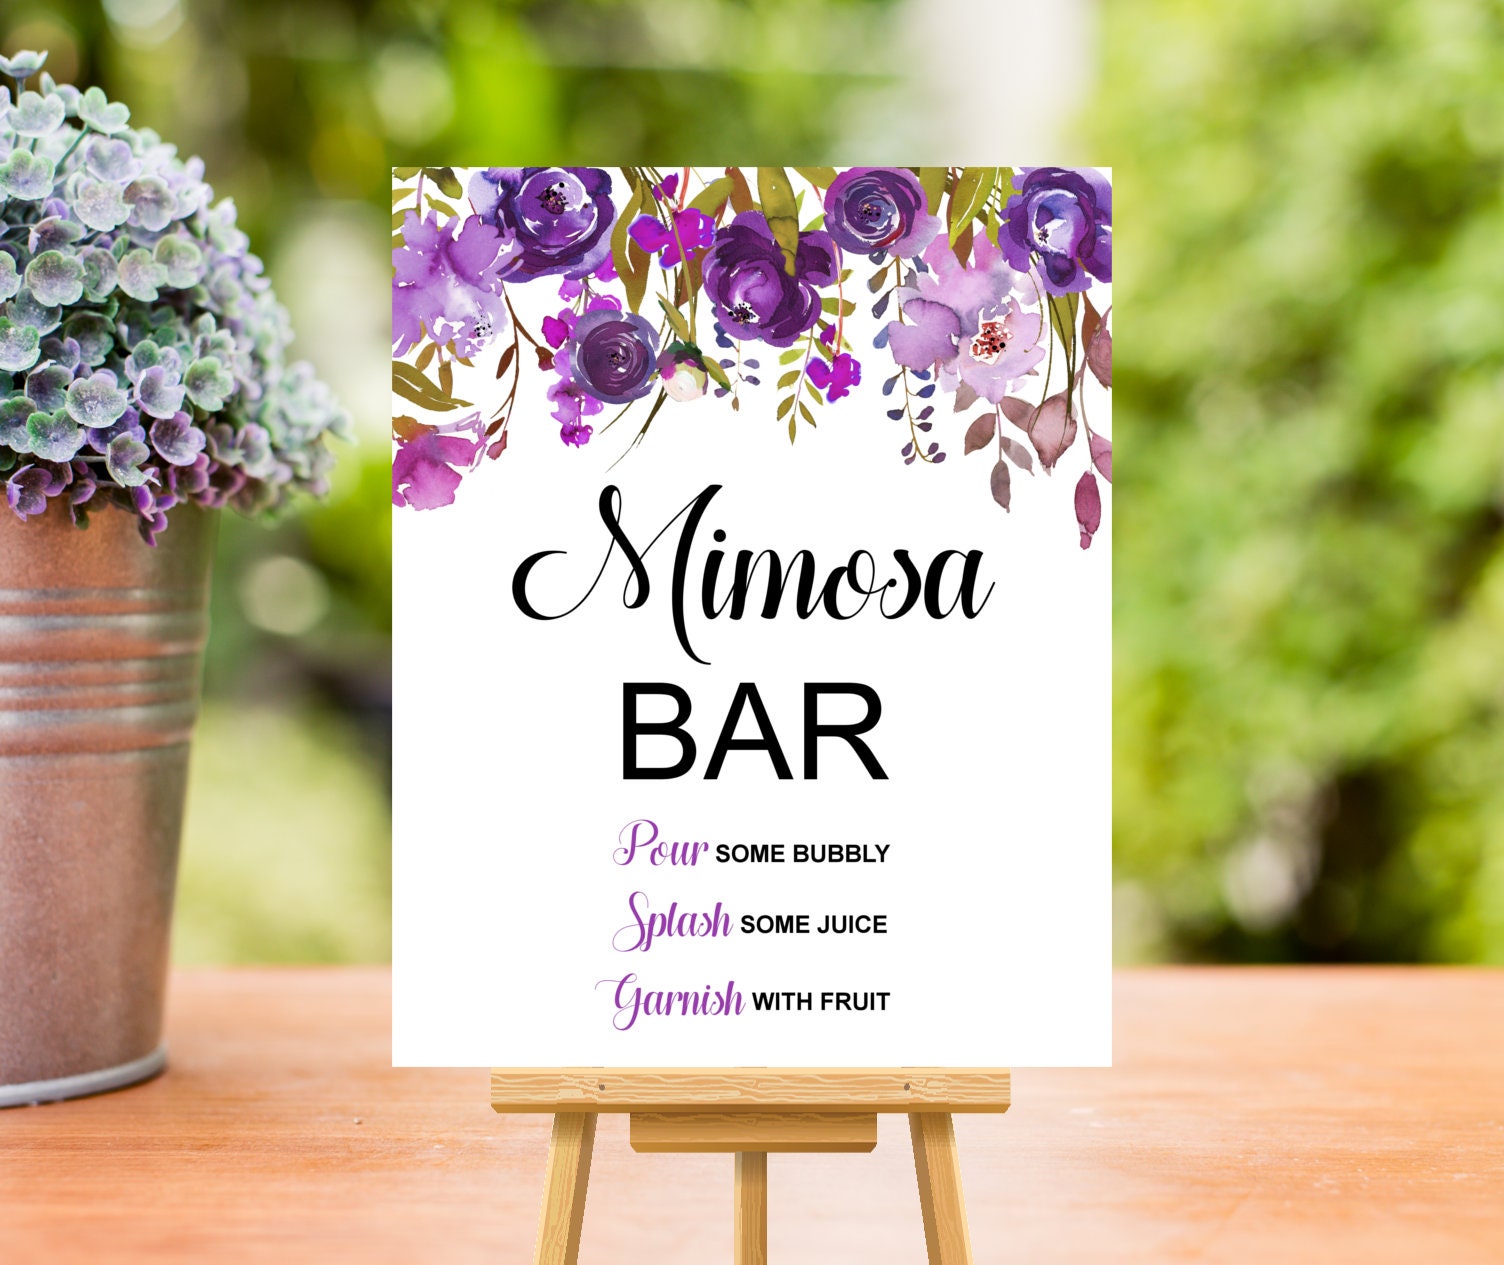 PRESTIGE Mimosa Bar Supplies Kit - Brunch Decorations w/Mimosa Bar Sign,  Bubbly Banner, Boho Bridal Shower Decorations Rose Gold, Rustic Baby Shower  Decorations Momosa, Wedding Decor, Mothers Day Set : Health & Household 